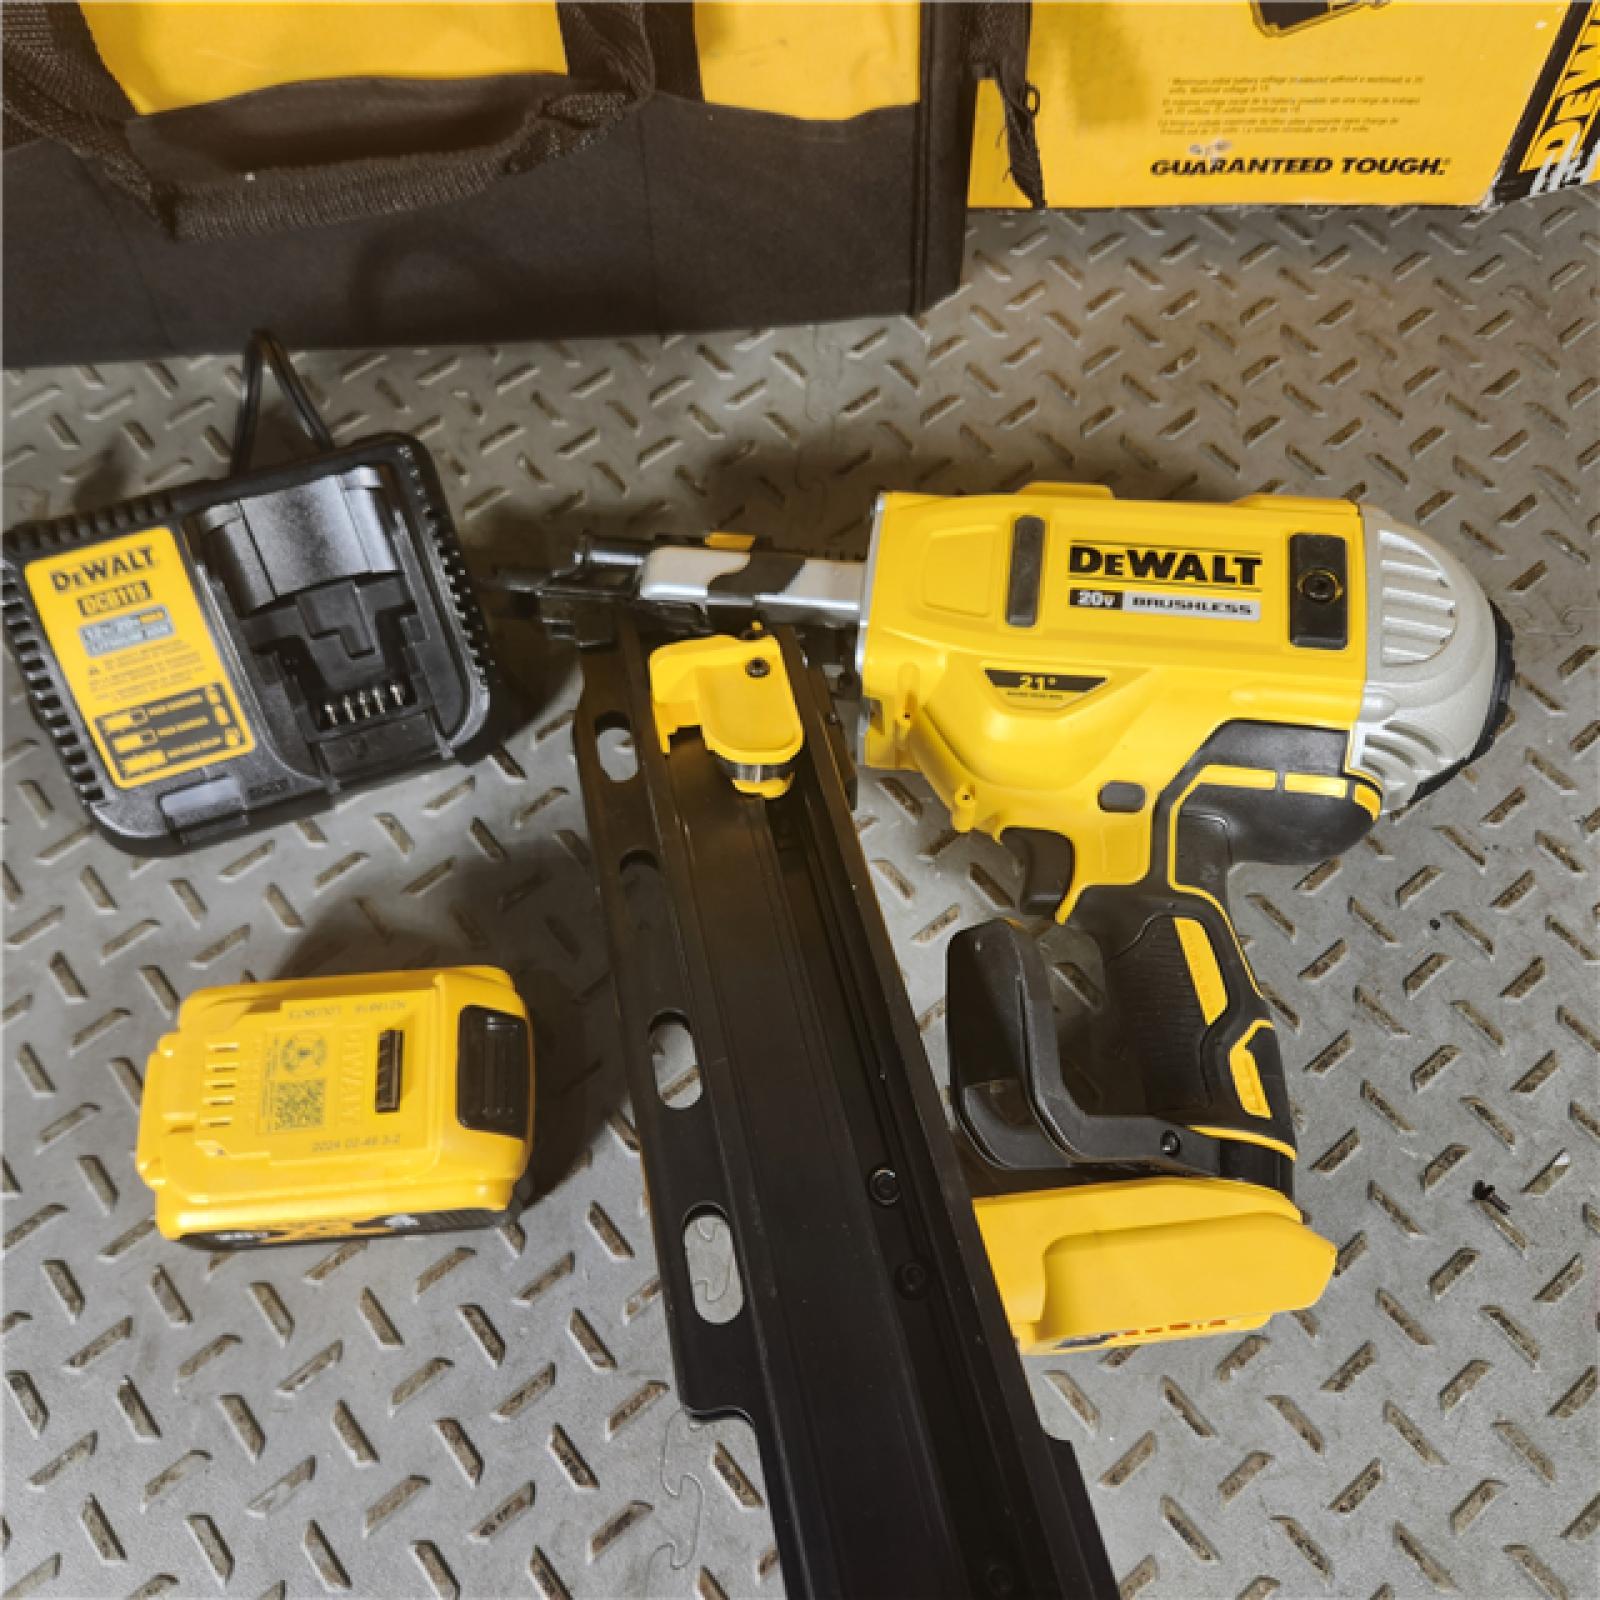 Houston Location - As-Is DeWalt 20V MAX Collated Cordless Framing Nailer Tool Kit with Rafter Hook